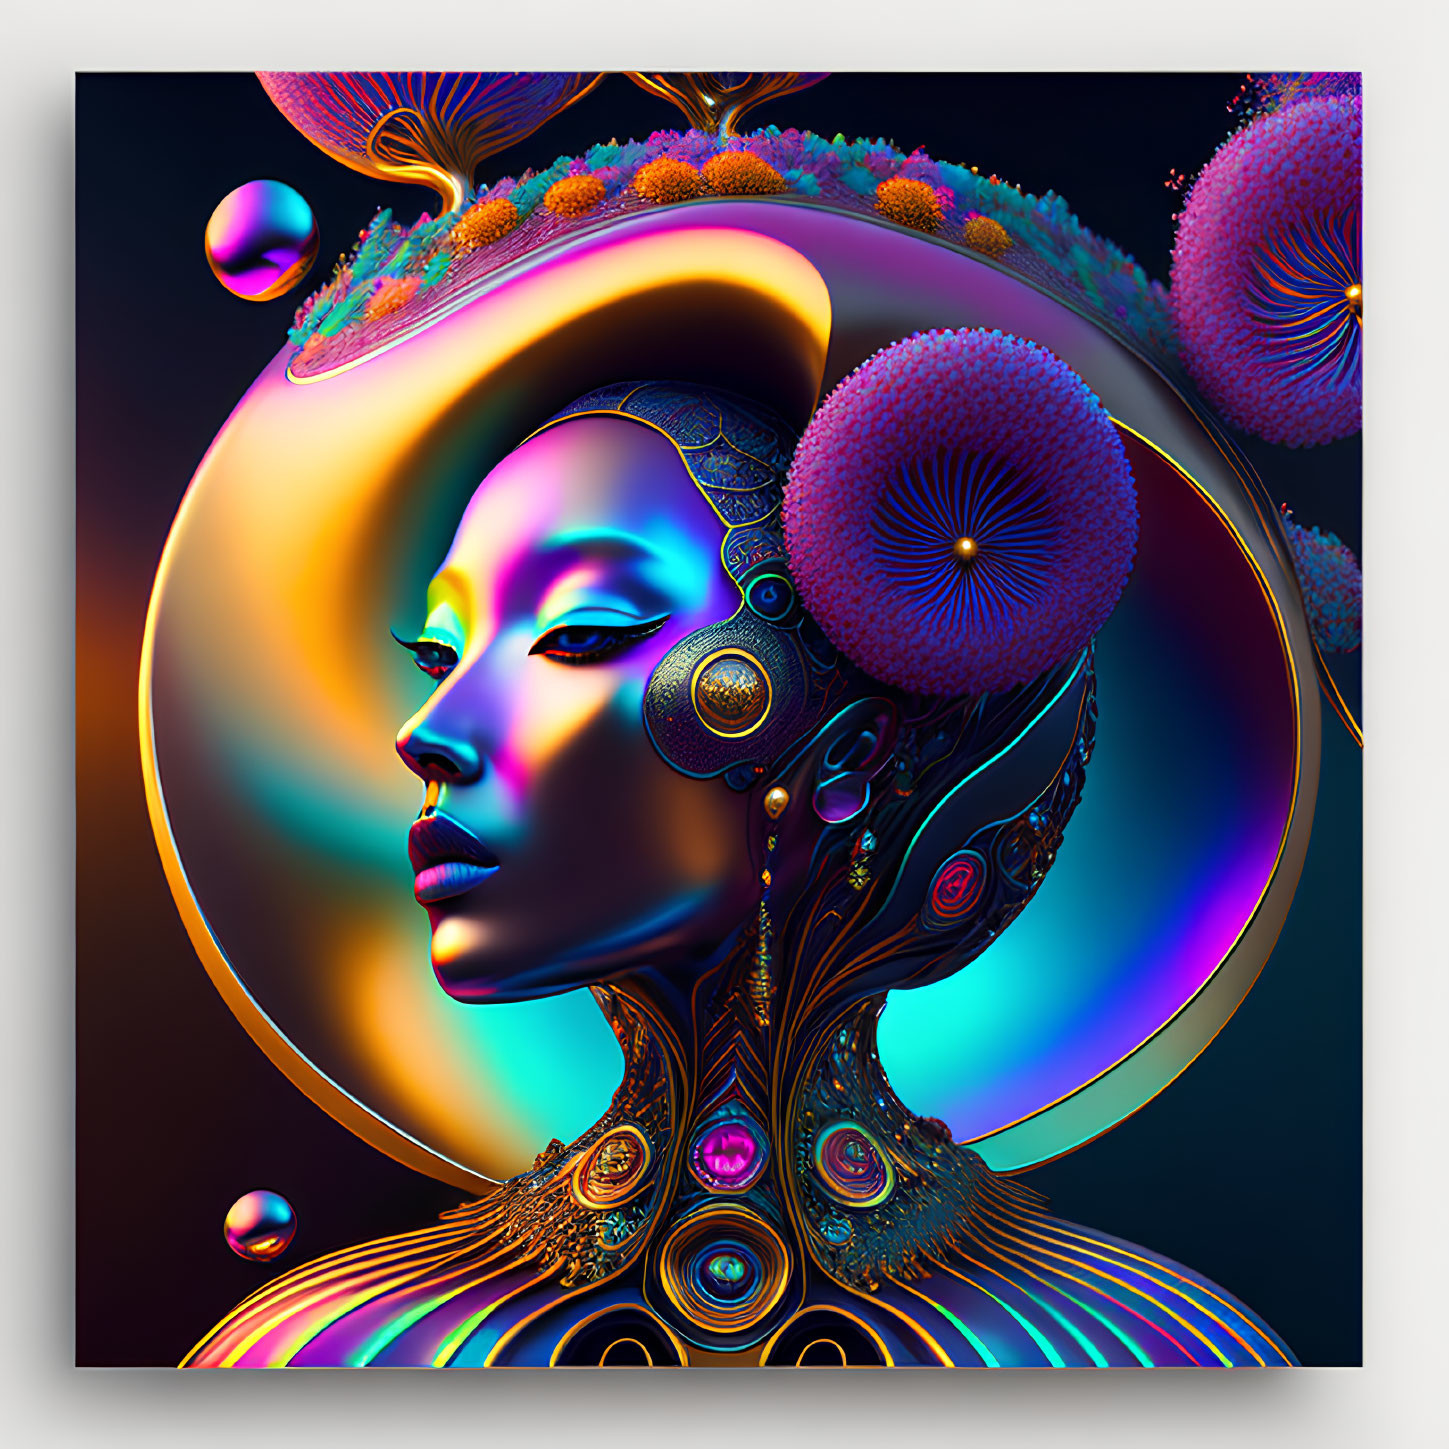 Colorful digital artwork of woman with futuristic headgear and surreal elements